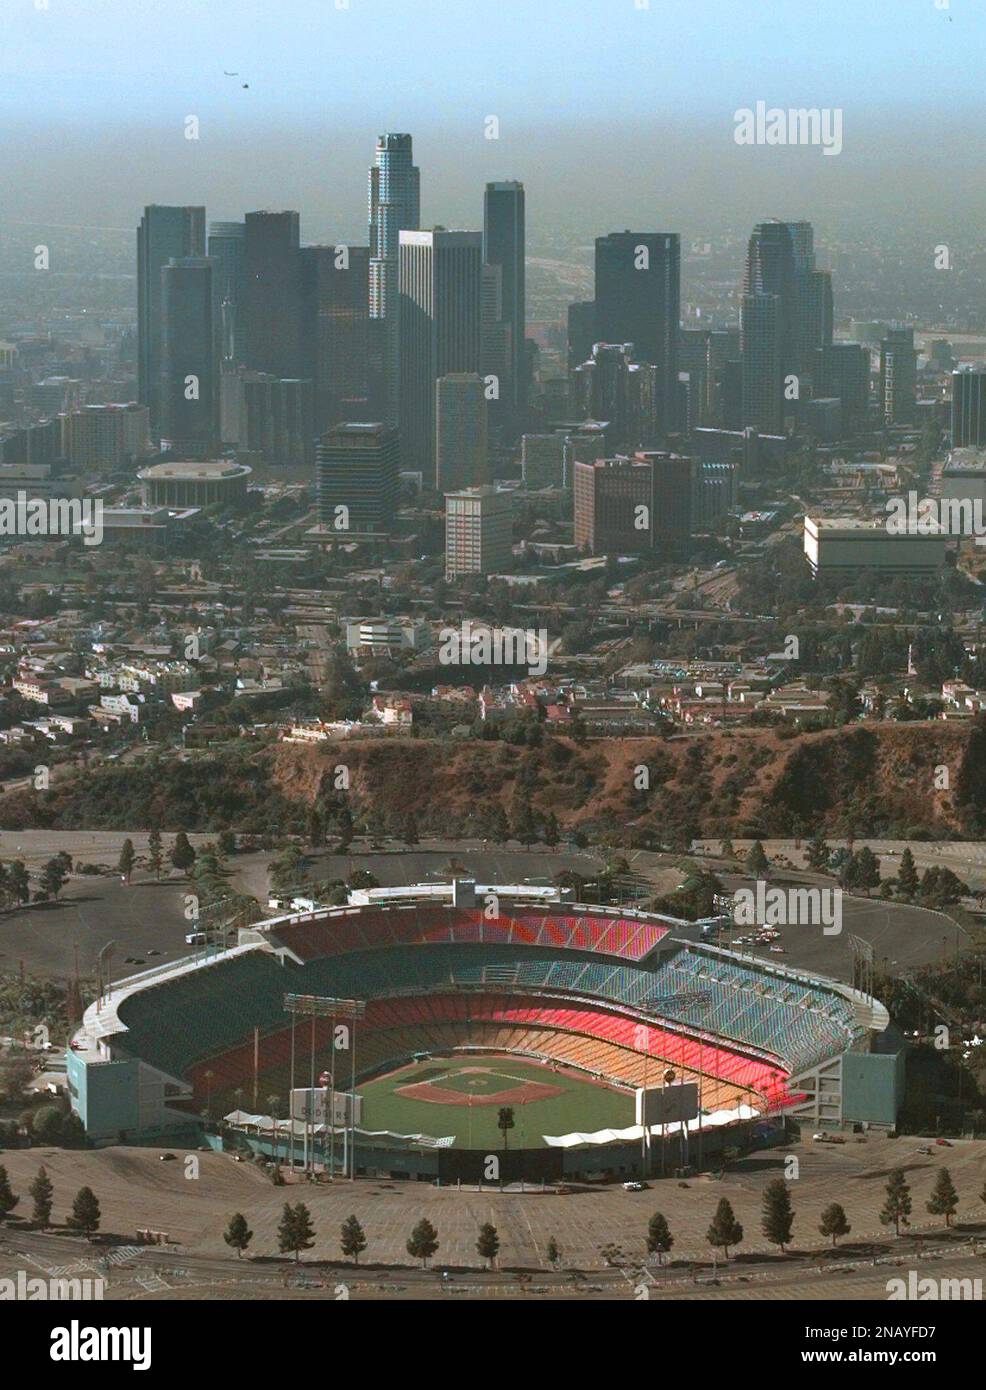 FILE - This Oct. 3, 1995 file photo is an aerial view of Dodger Stadium  with the downtown Los Angeles skyline in the background. Embattled Los  Angeles Dodgers owner Frank McCourt and